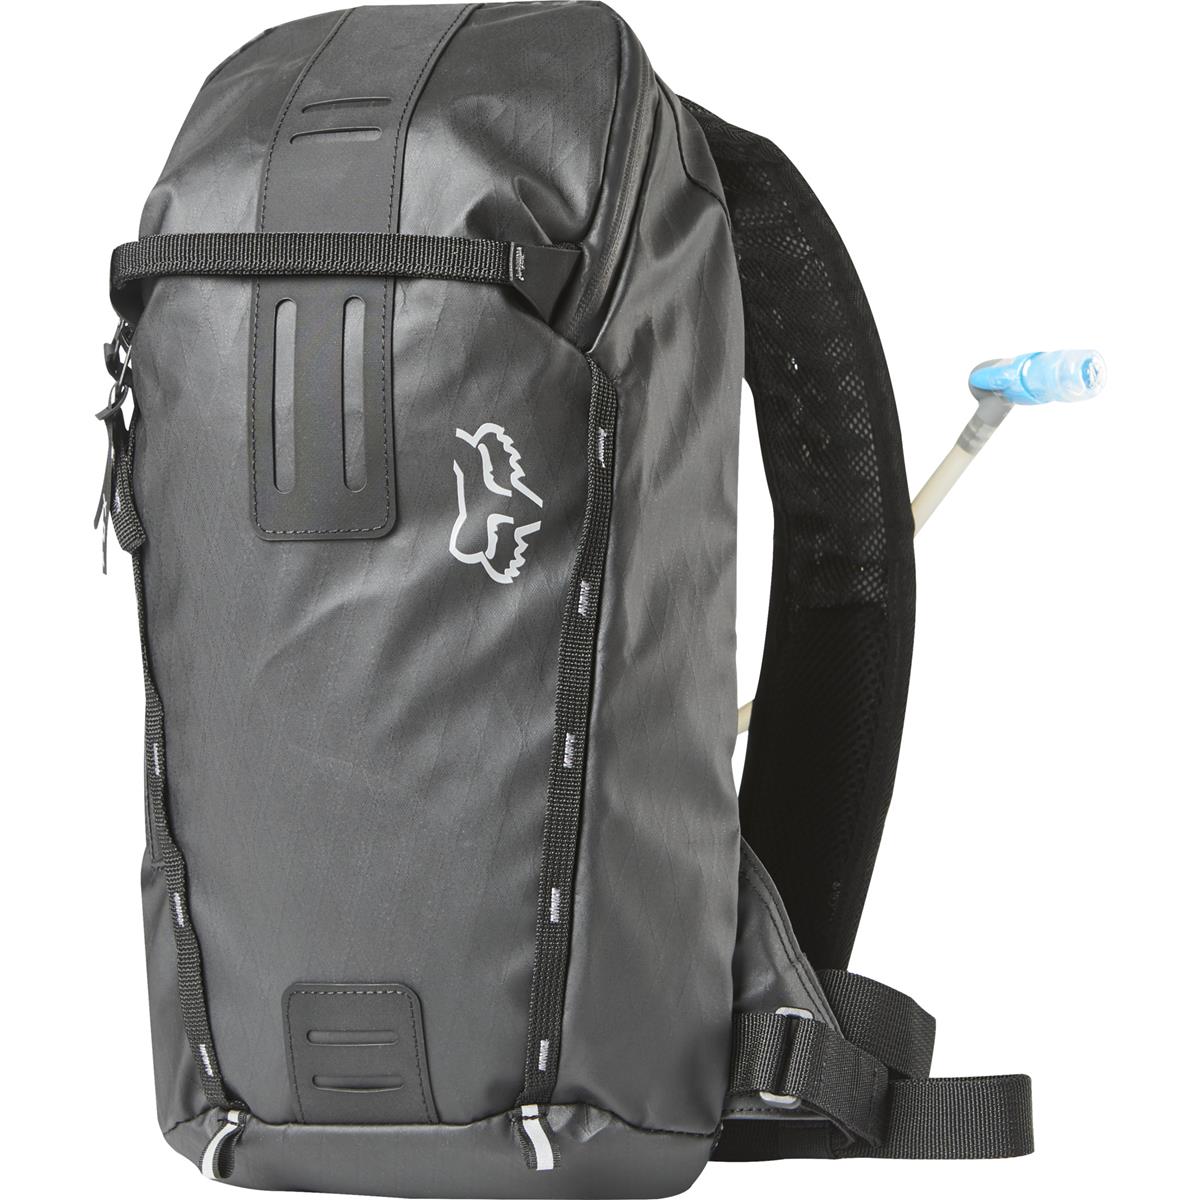 Fox Backpack with Hydration System Compartment Utility Hydration 7.5L, Black